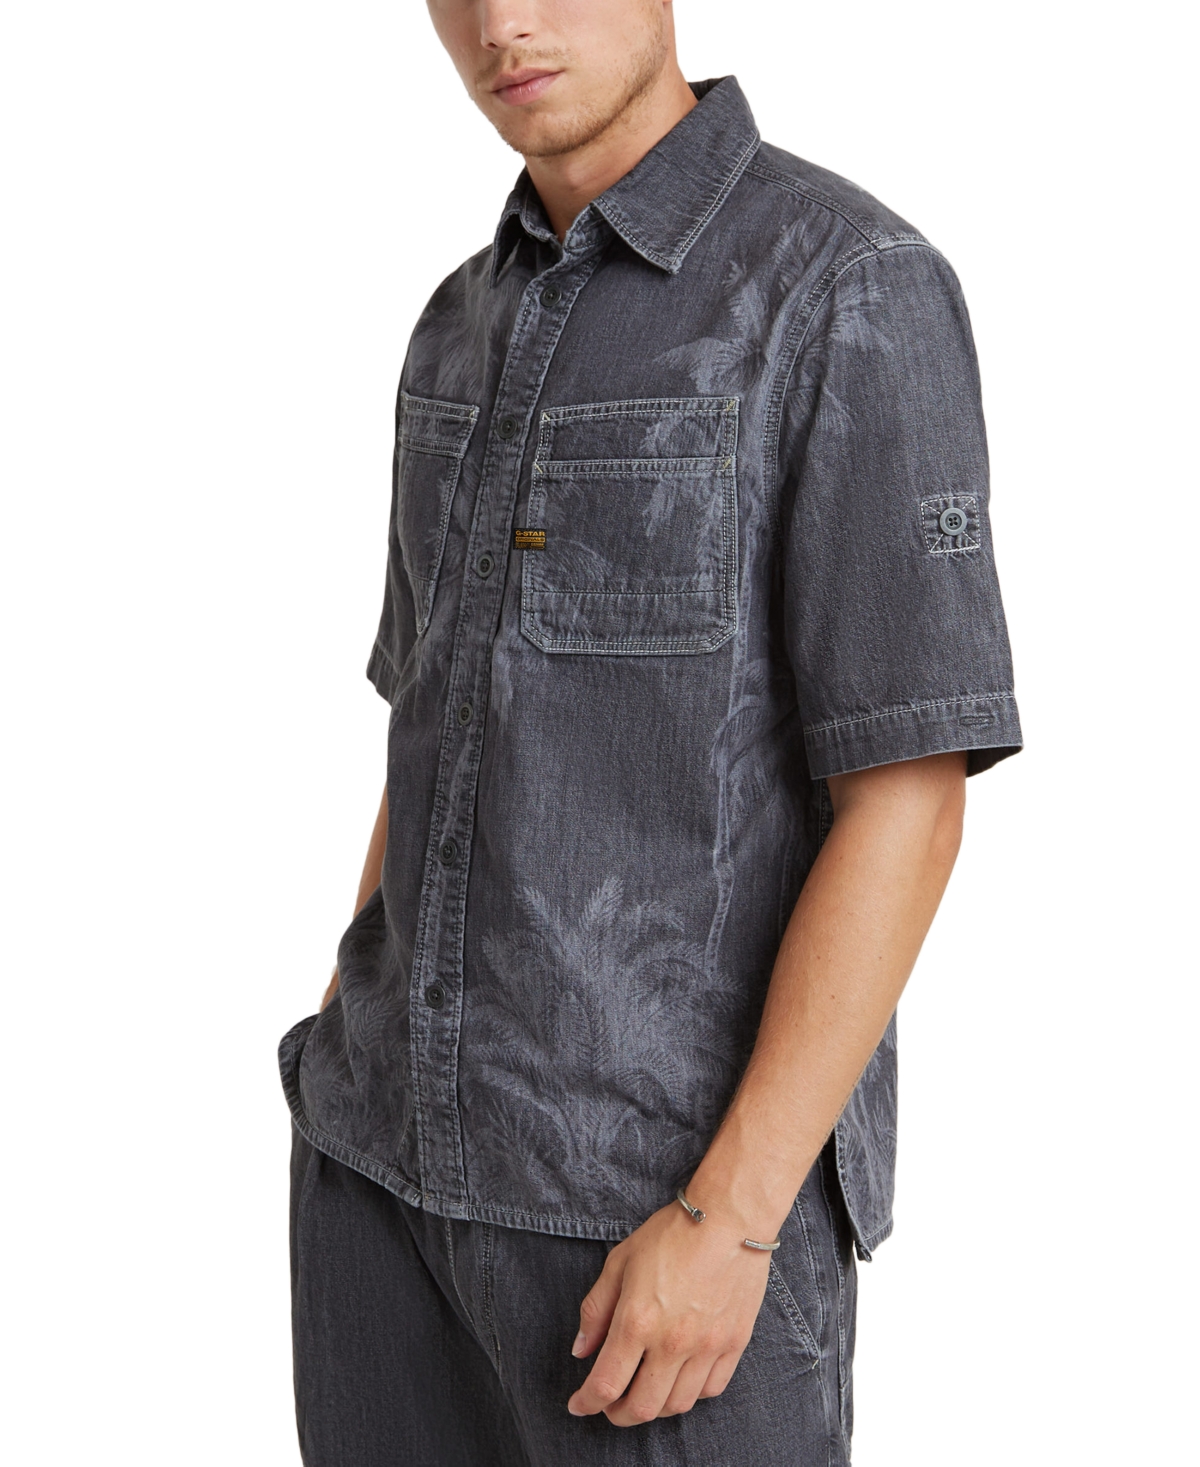 Men's Double-Pocket Shirt - Faded Acer